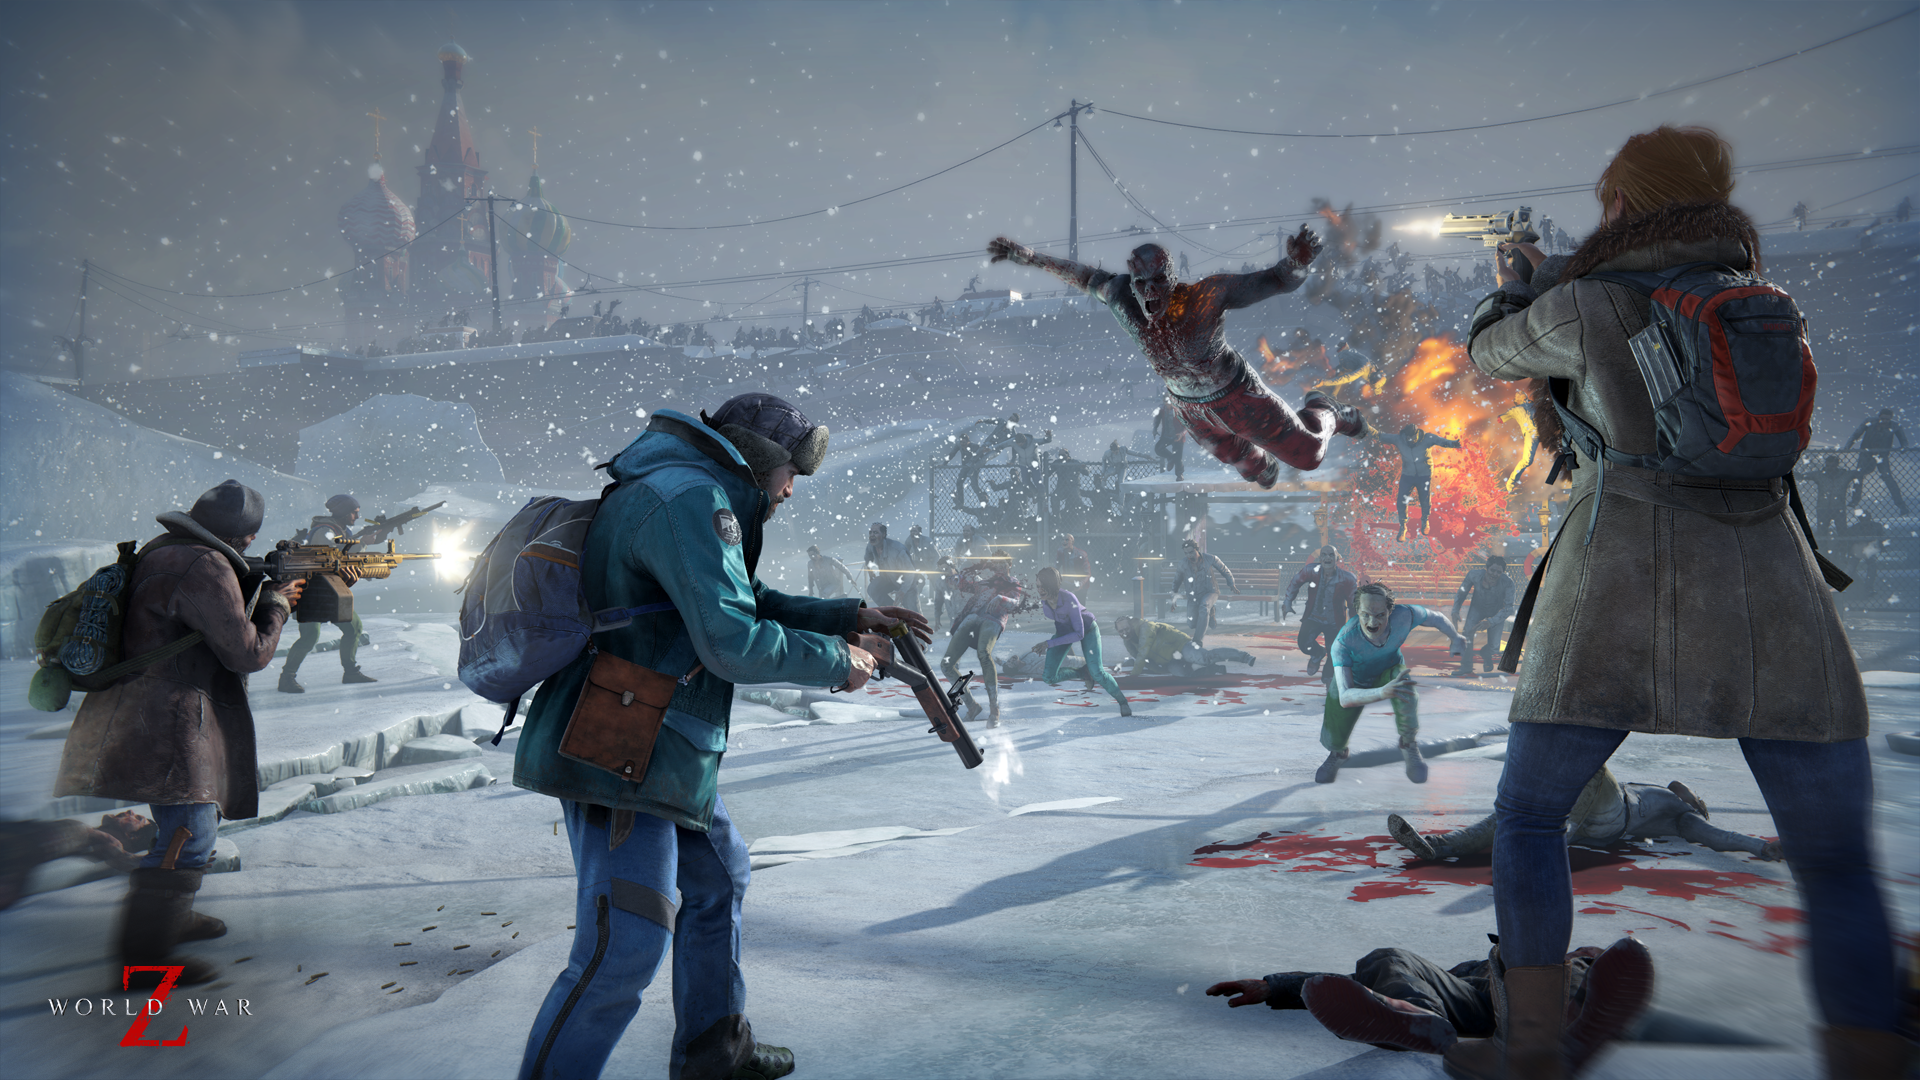 World War Z Update Version 1.06 Released, Brings Extreme Difficulty Settings, Tweaks, and More